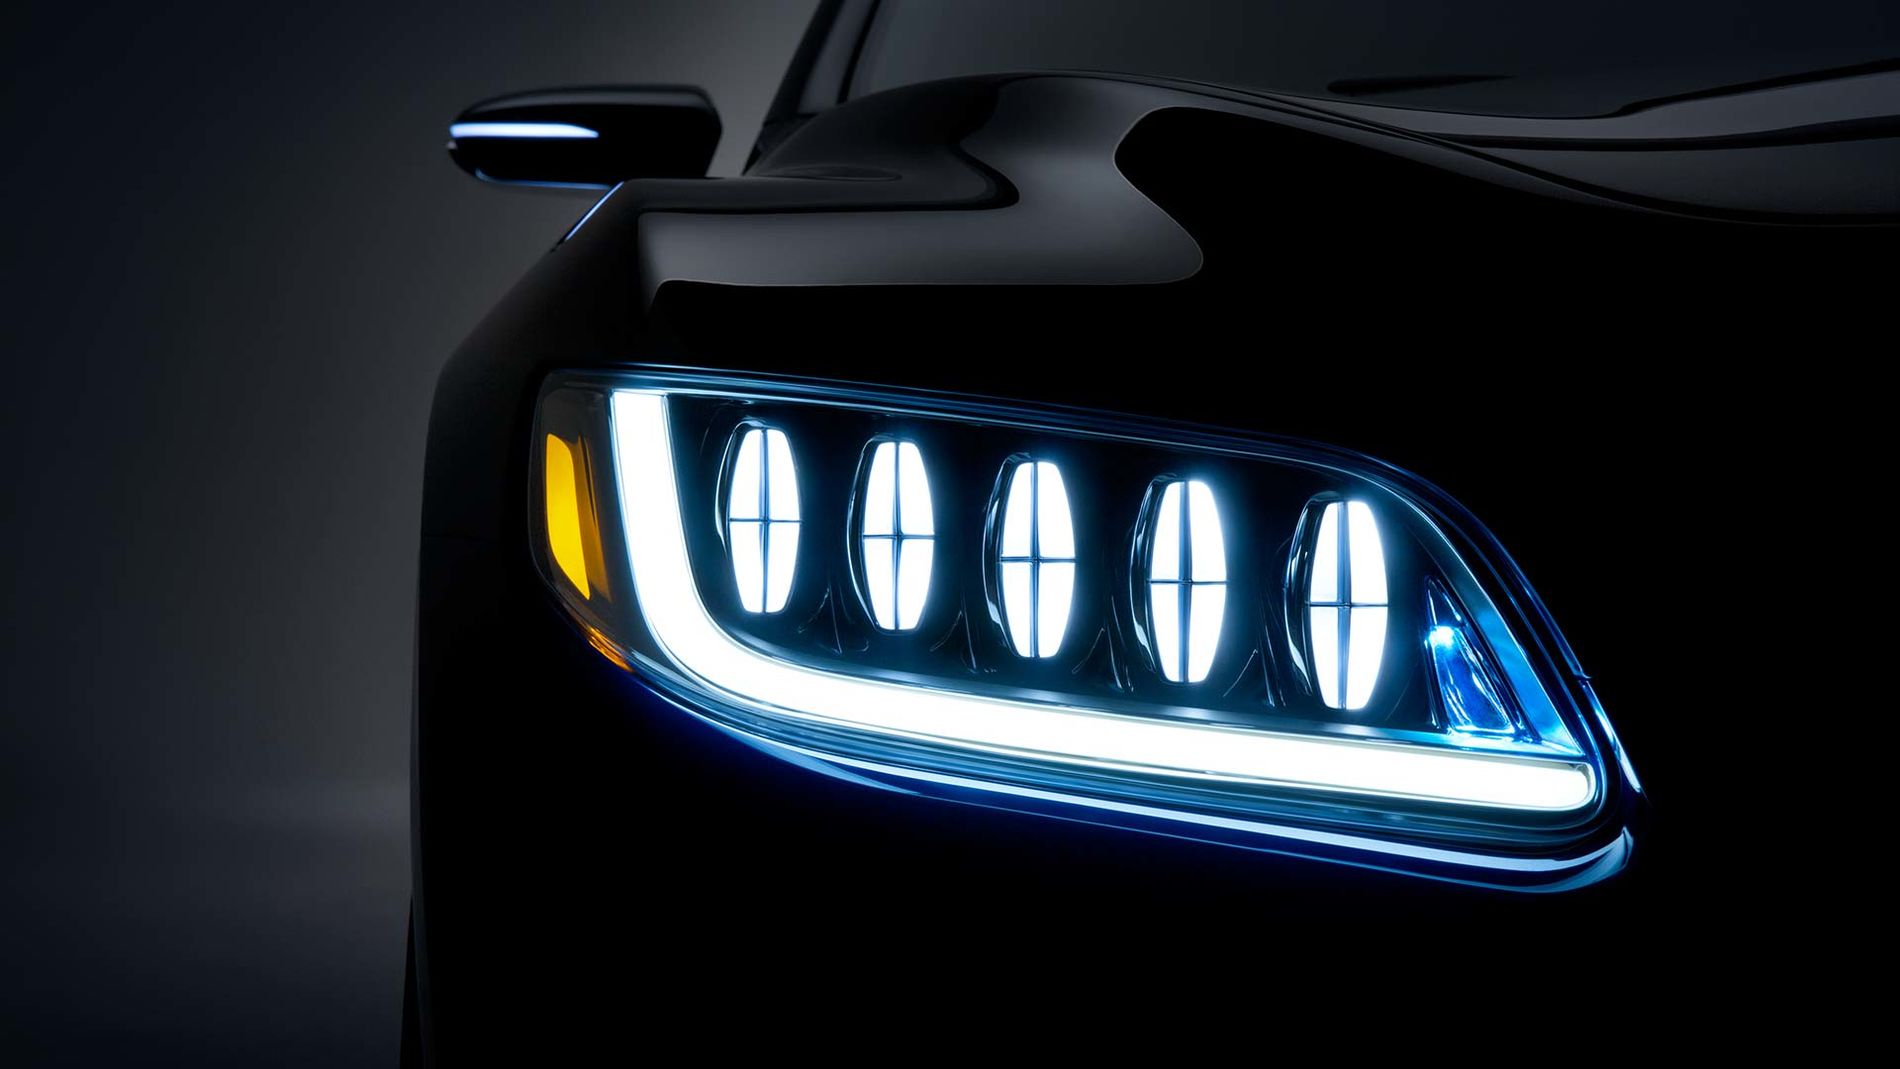 Buy LED headlights: improve the lighting of your car.